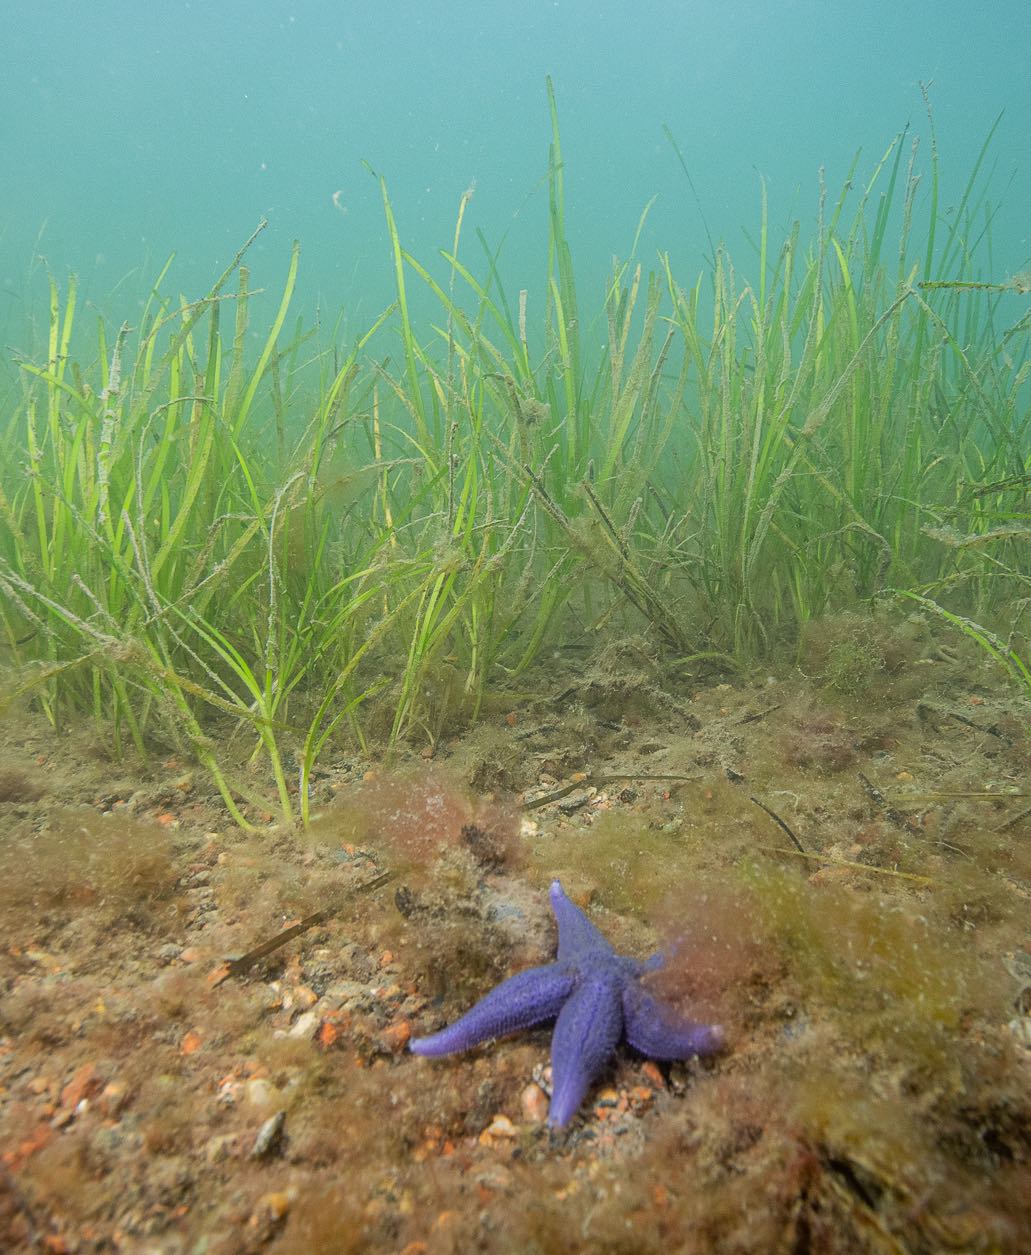 Eelgrass bed after 1 year of restoration in the bay of Askeron, Sweden.